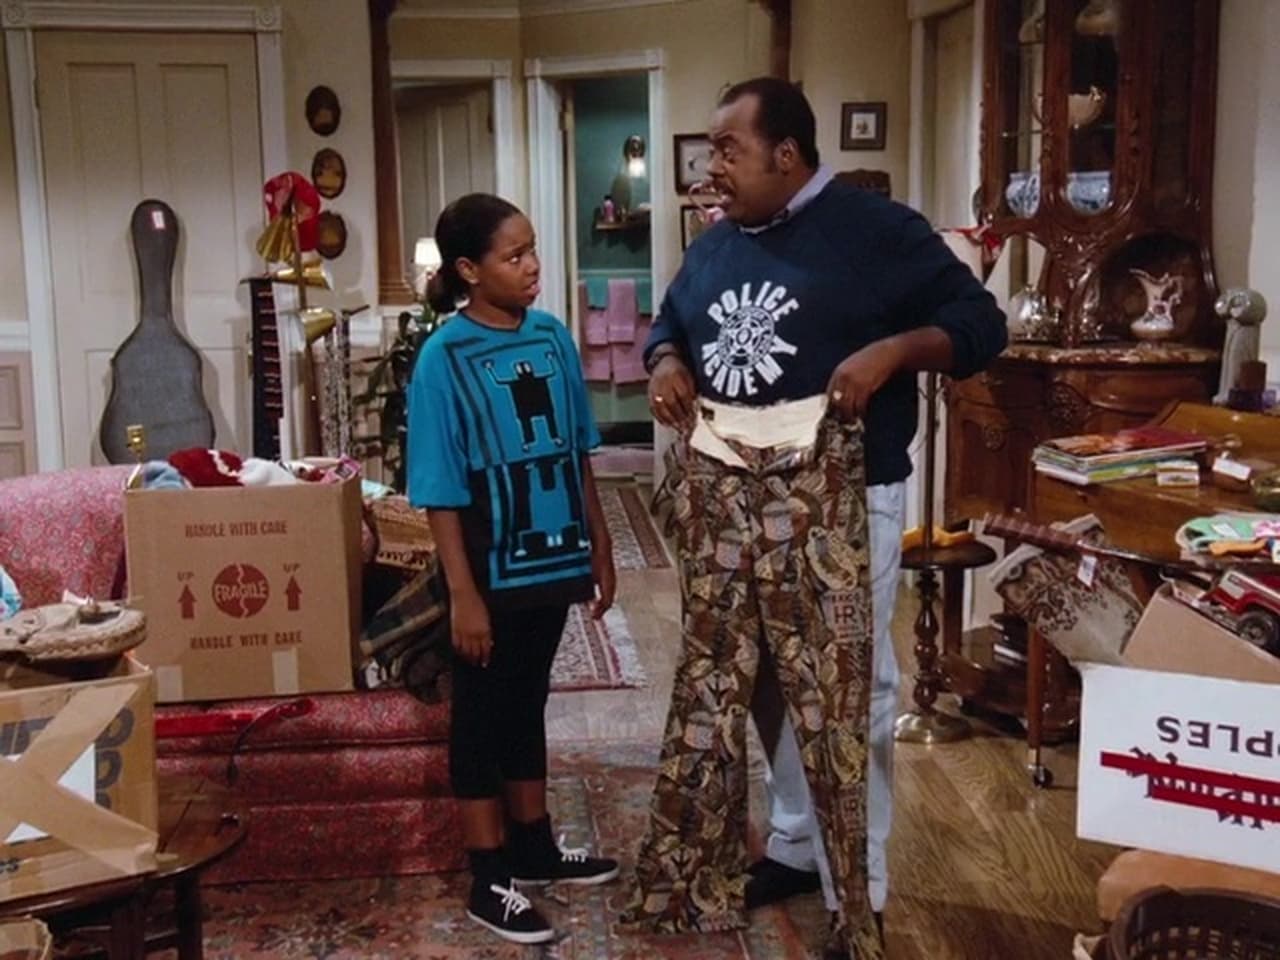 Family Matters - Season 1 Episode 11 : The Quilt